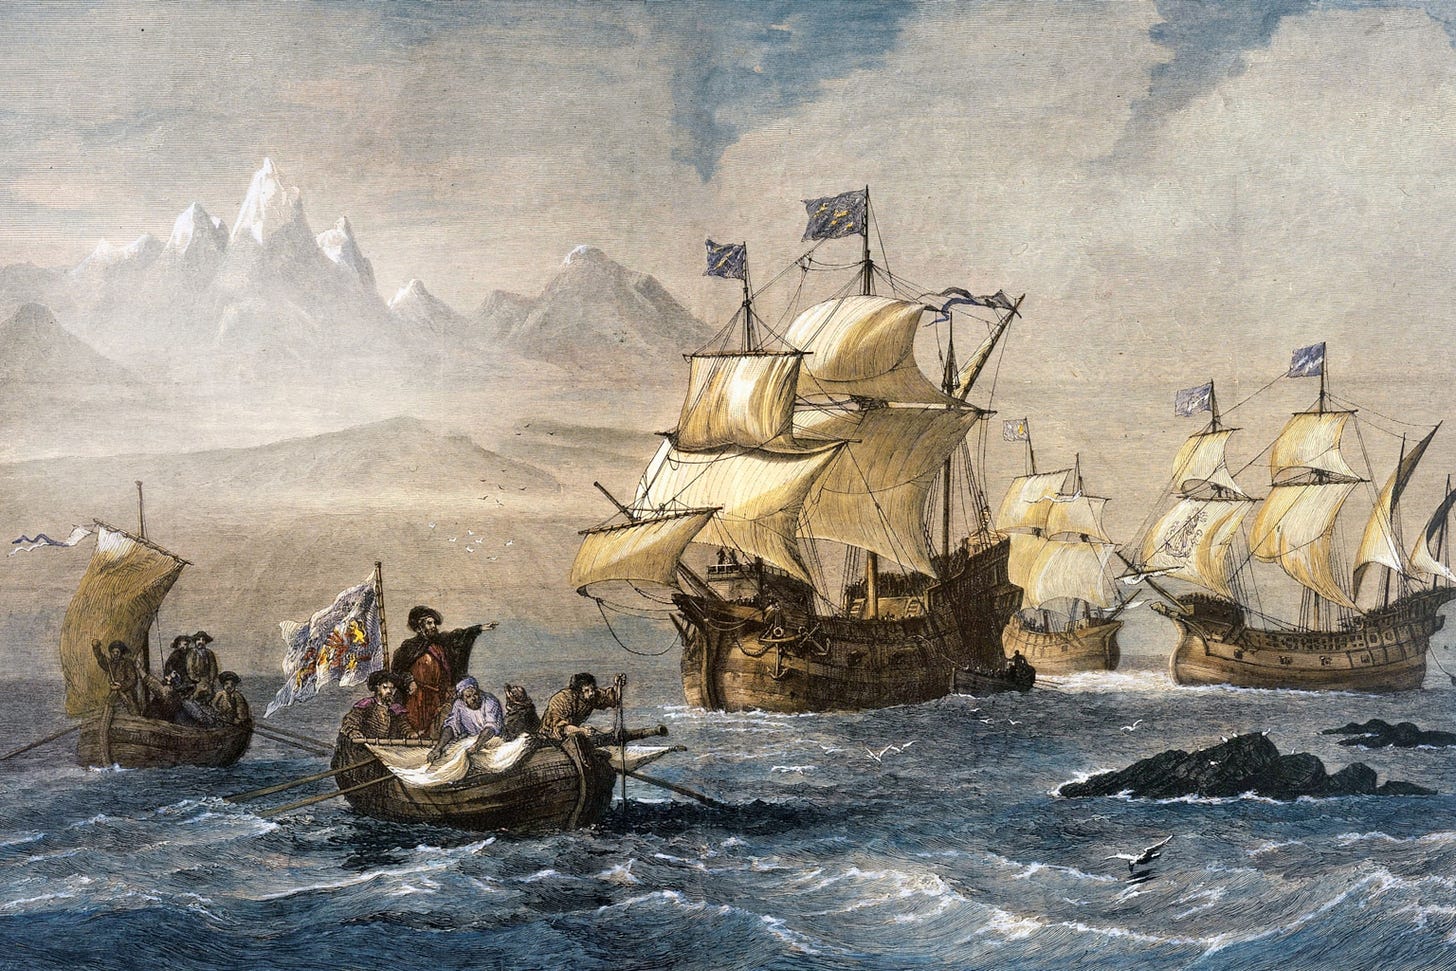 240 men started Magellan's voyage around the world. Only 18 finished it.